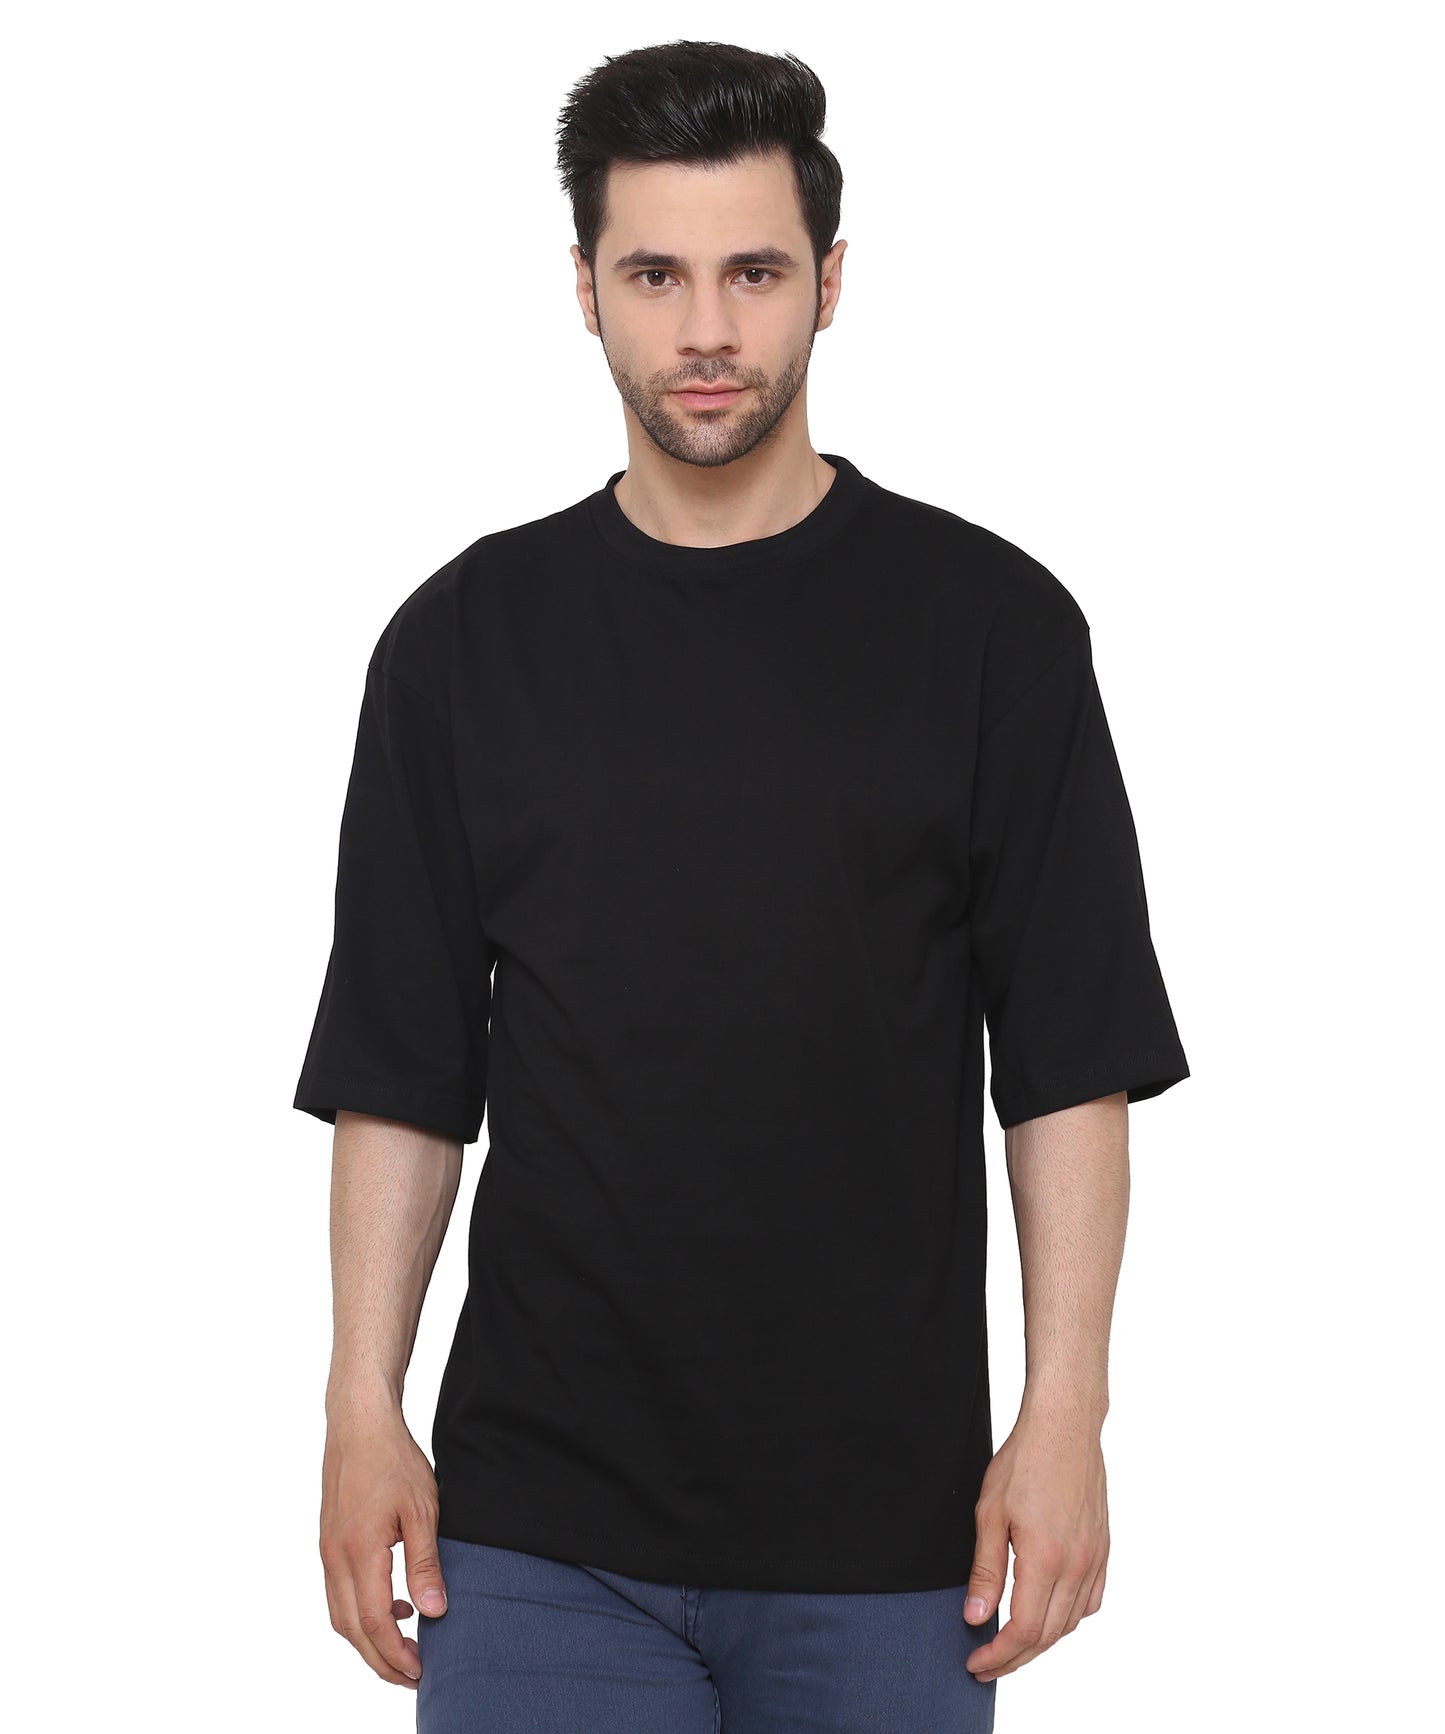 Black Oversized Cotton T-shirts Relaxed Fit Tees for Men